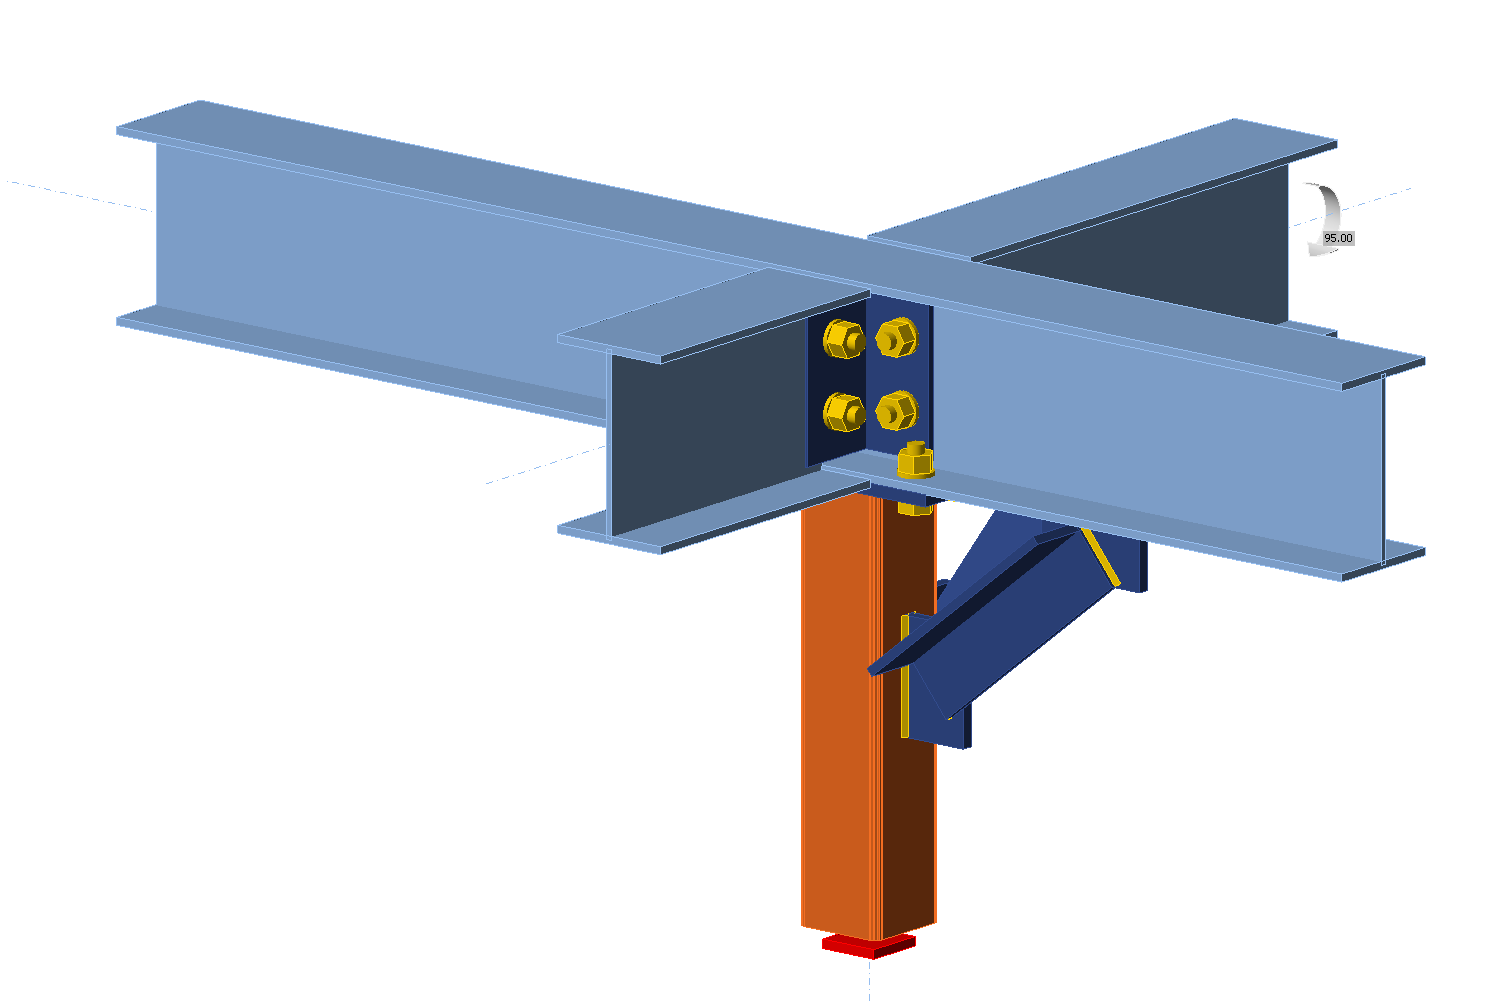 Image of 3D model of a steel connection